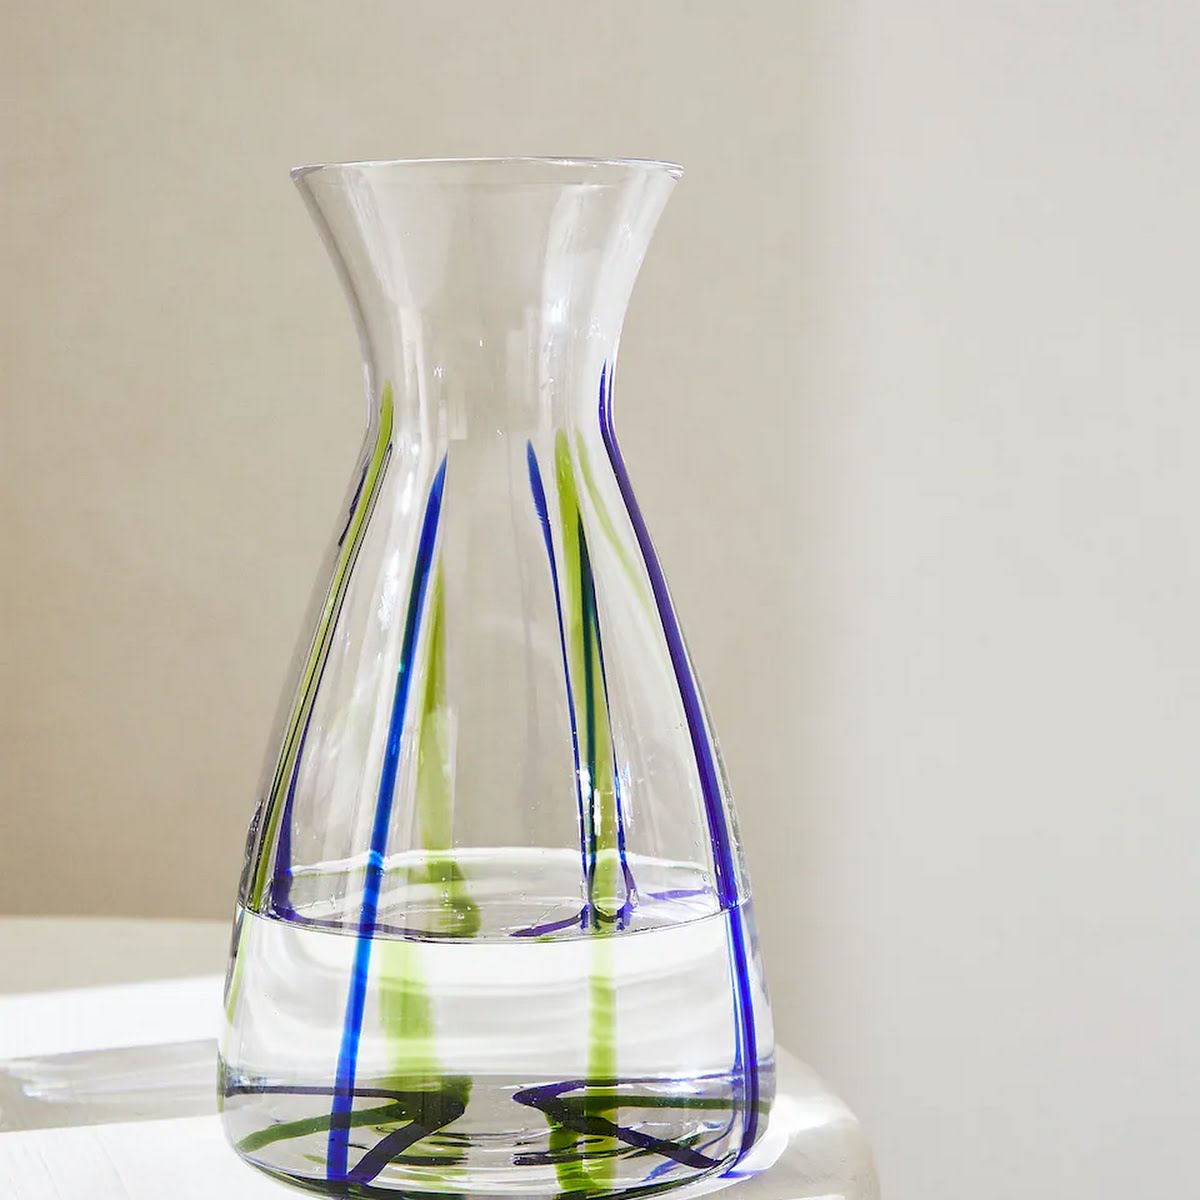 Zara, Glass Bottle with Coloured Lines, €17.99